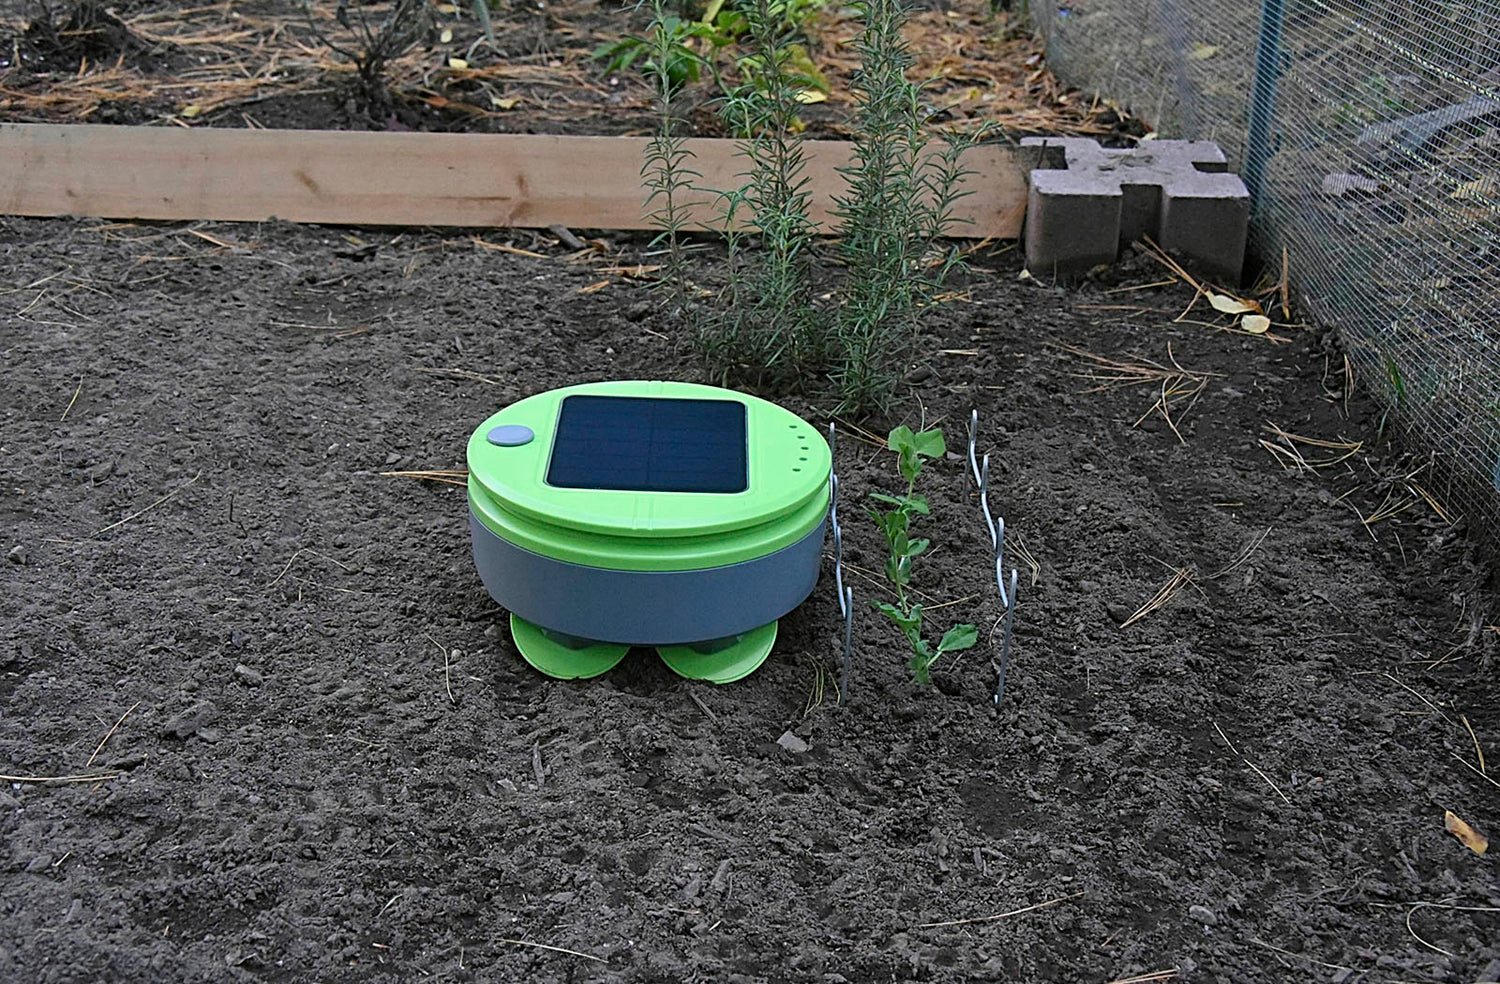 Tertill weeding robot against a metal row guard that protects young seedlings until the robot can sense it. Tertill prevents weeds all season long with just the touch of a button. It is the ultimate gardening tool.